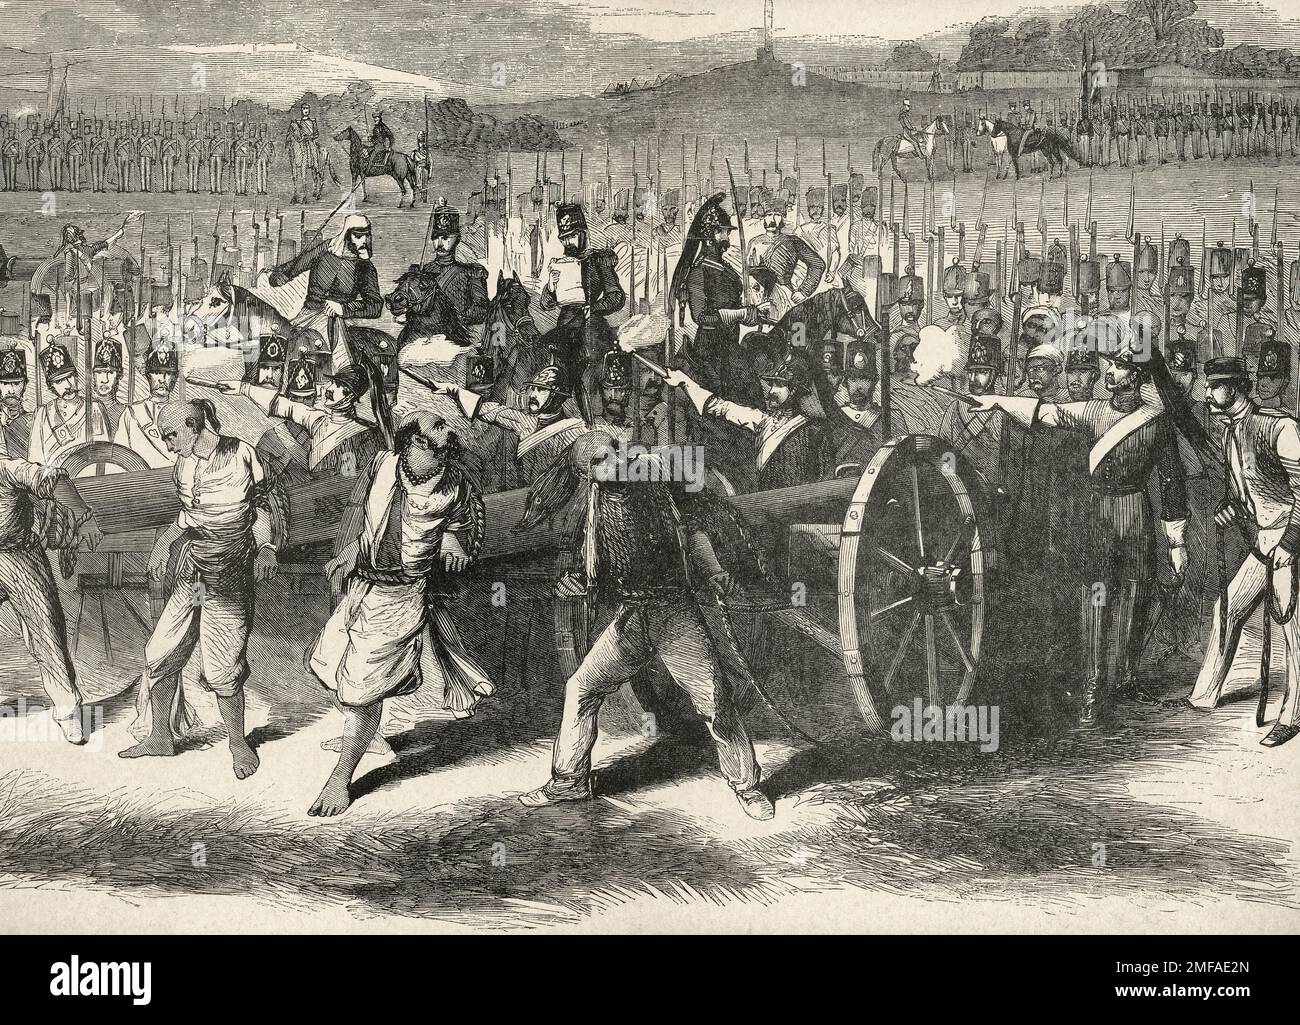 British 'Civilization' - How the English treat Prisoners of War - Blowing Sepoys from guns in India, 1857 Stock Photo